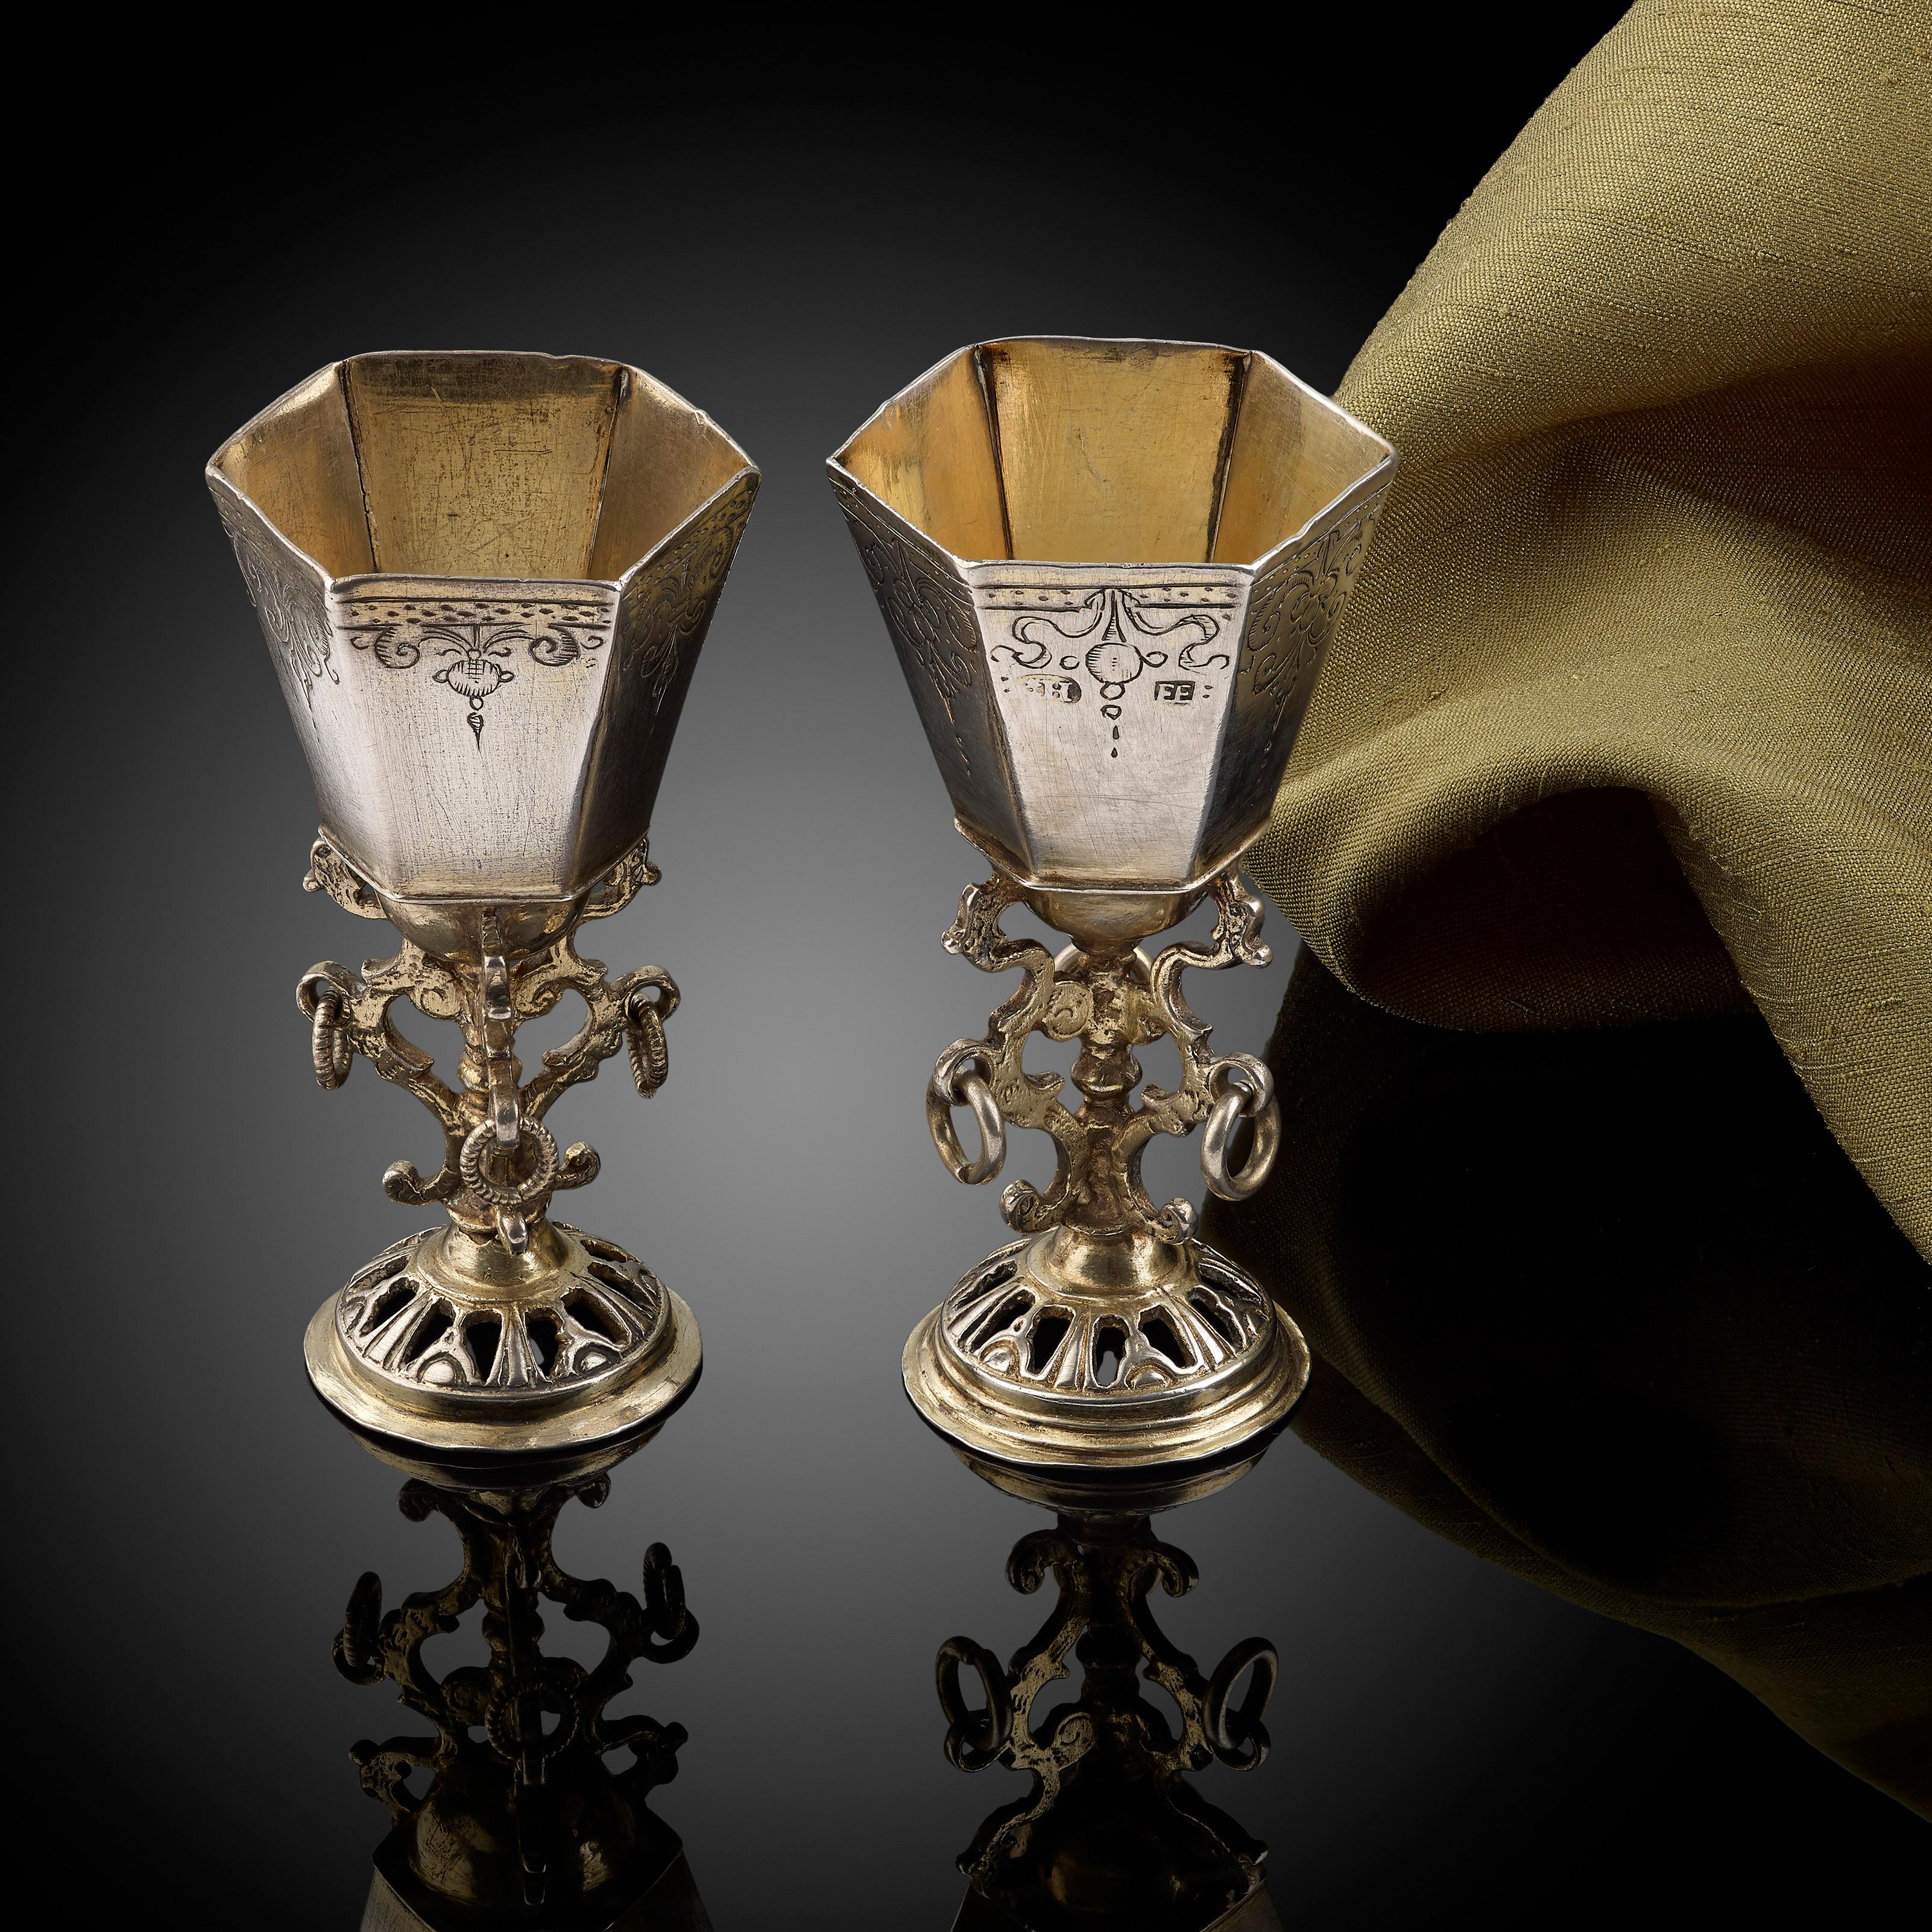 18th Century and Earlier Engraved Silver and Parcel-Gilt Cups, German, circa 1630